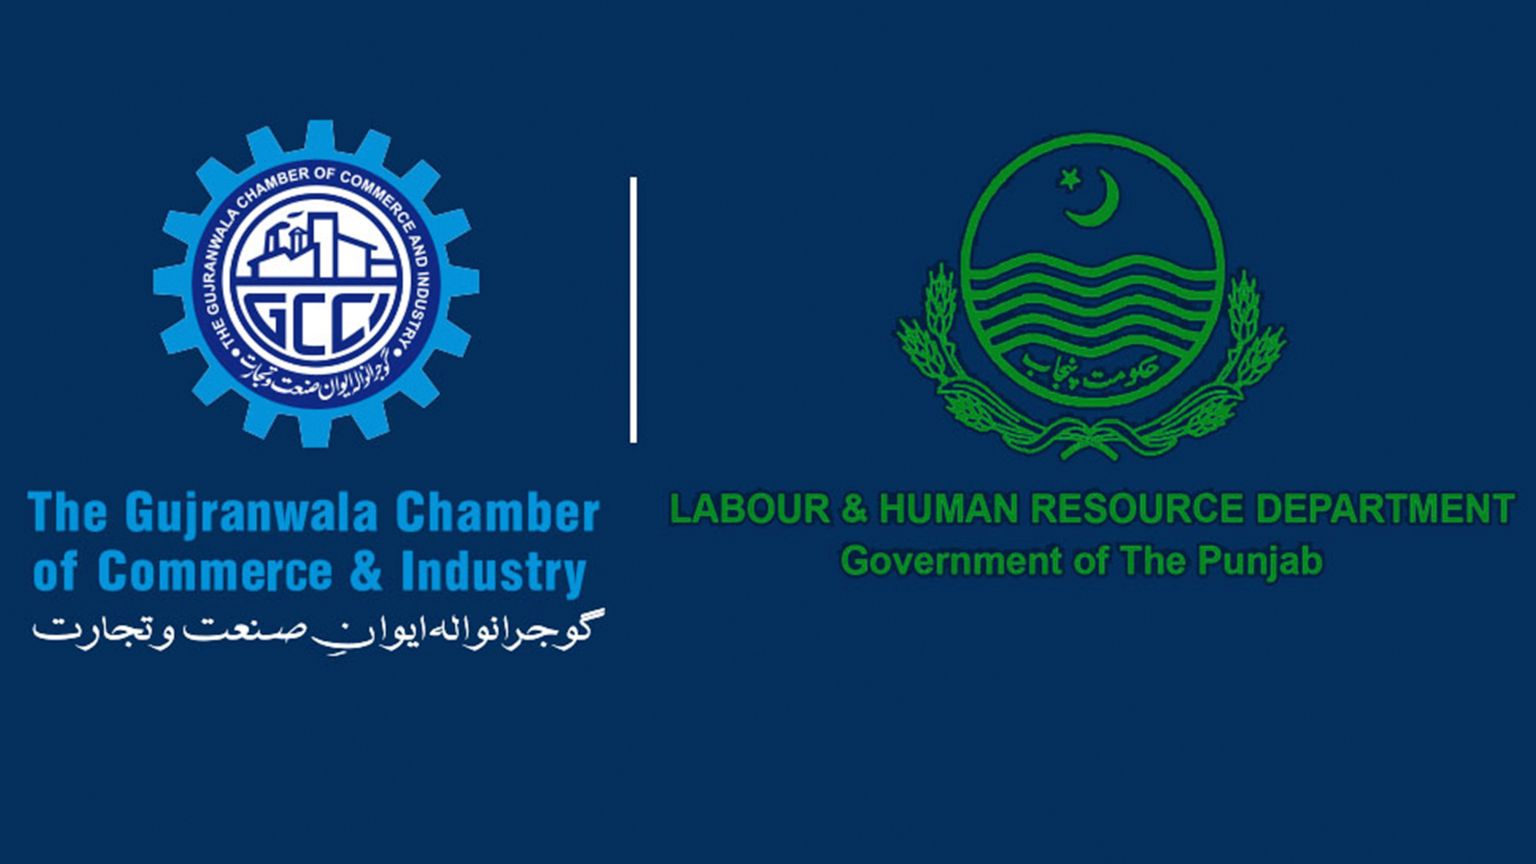 Labour and Human Resource Department